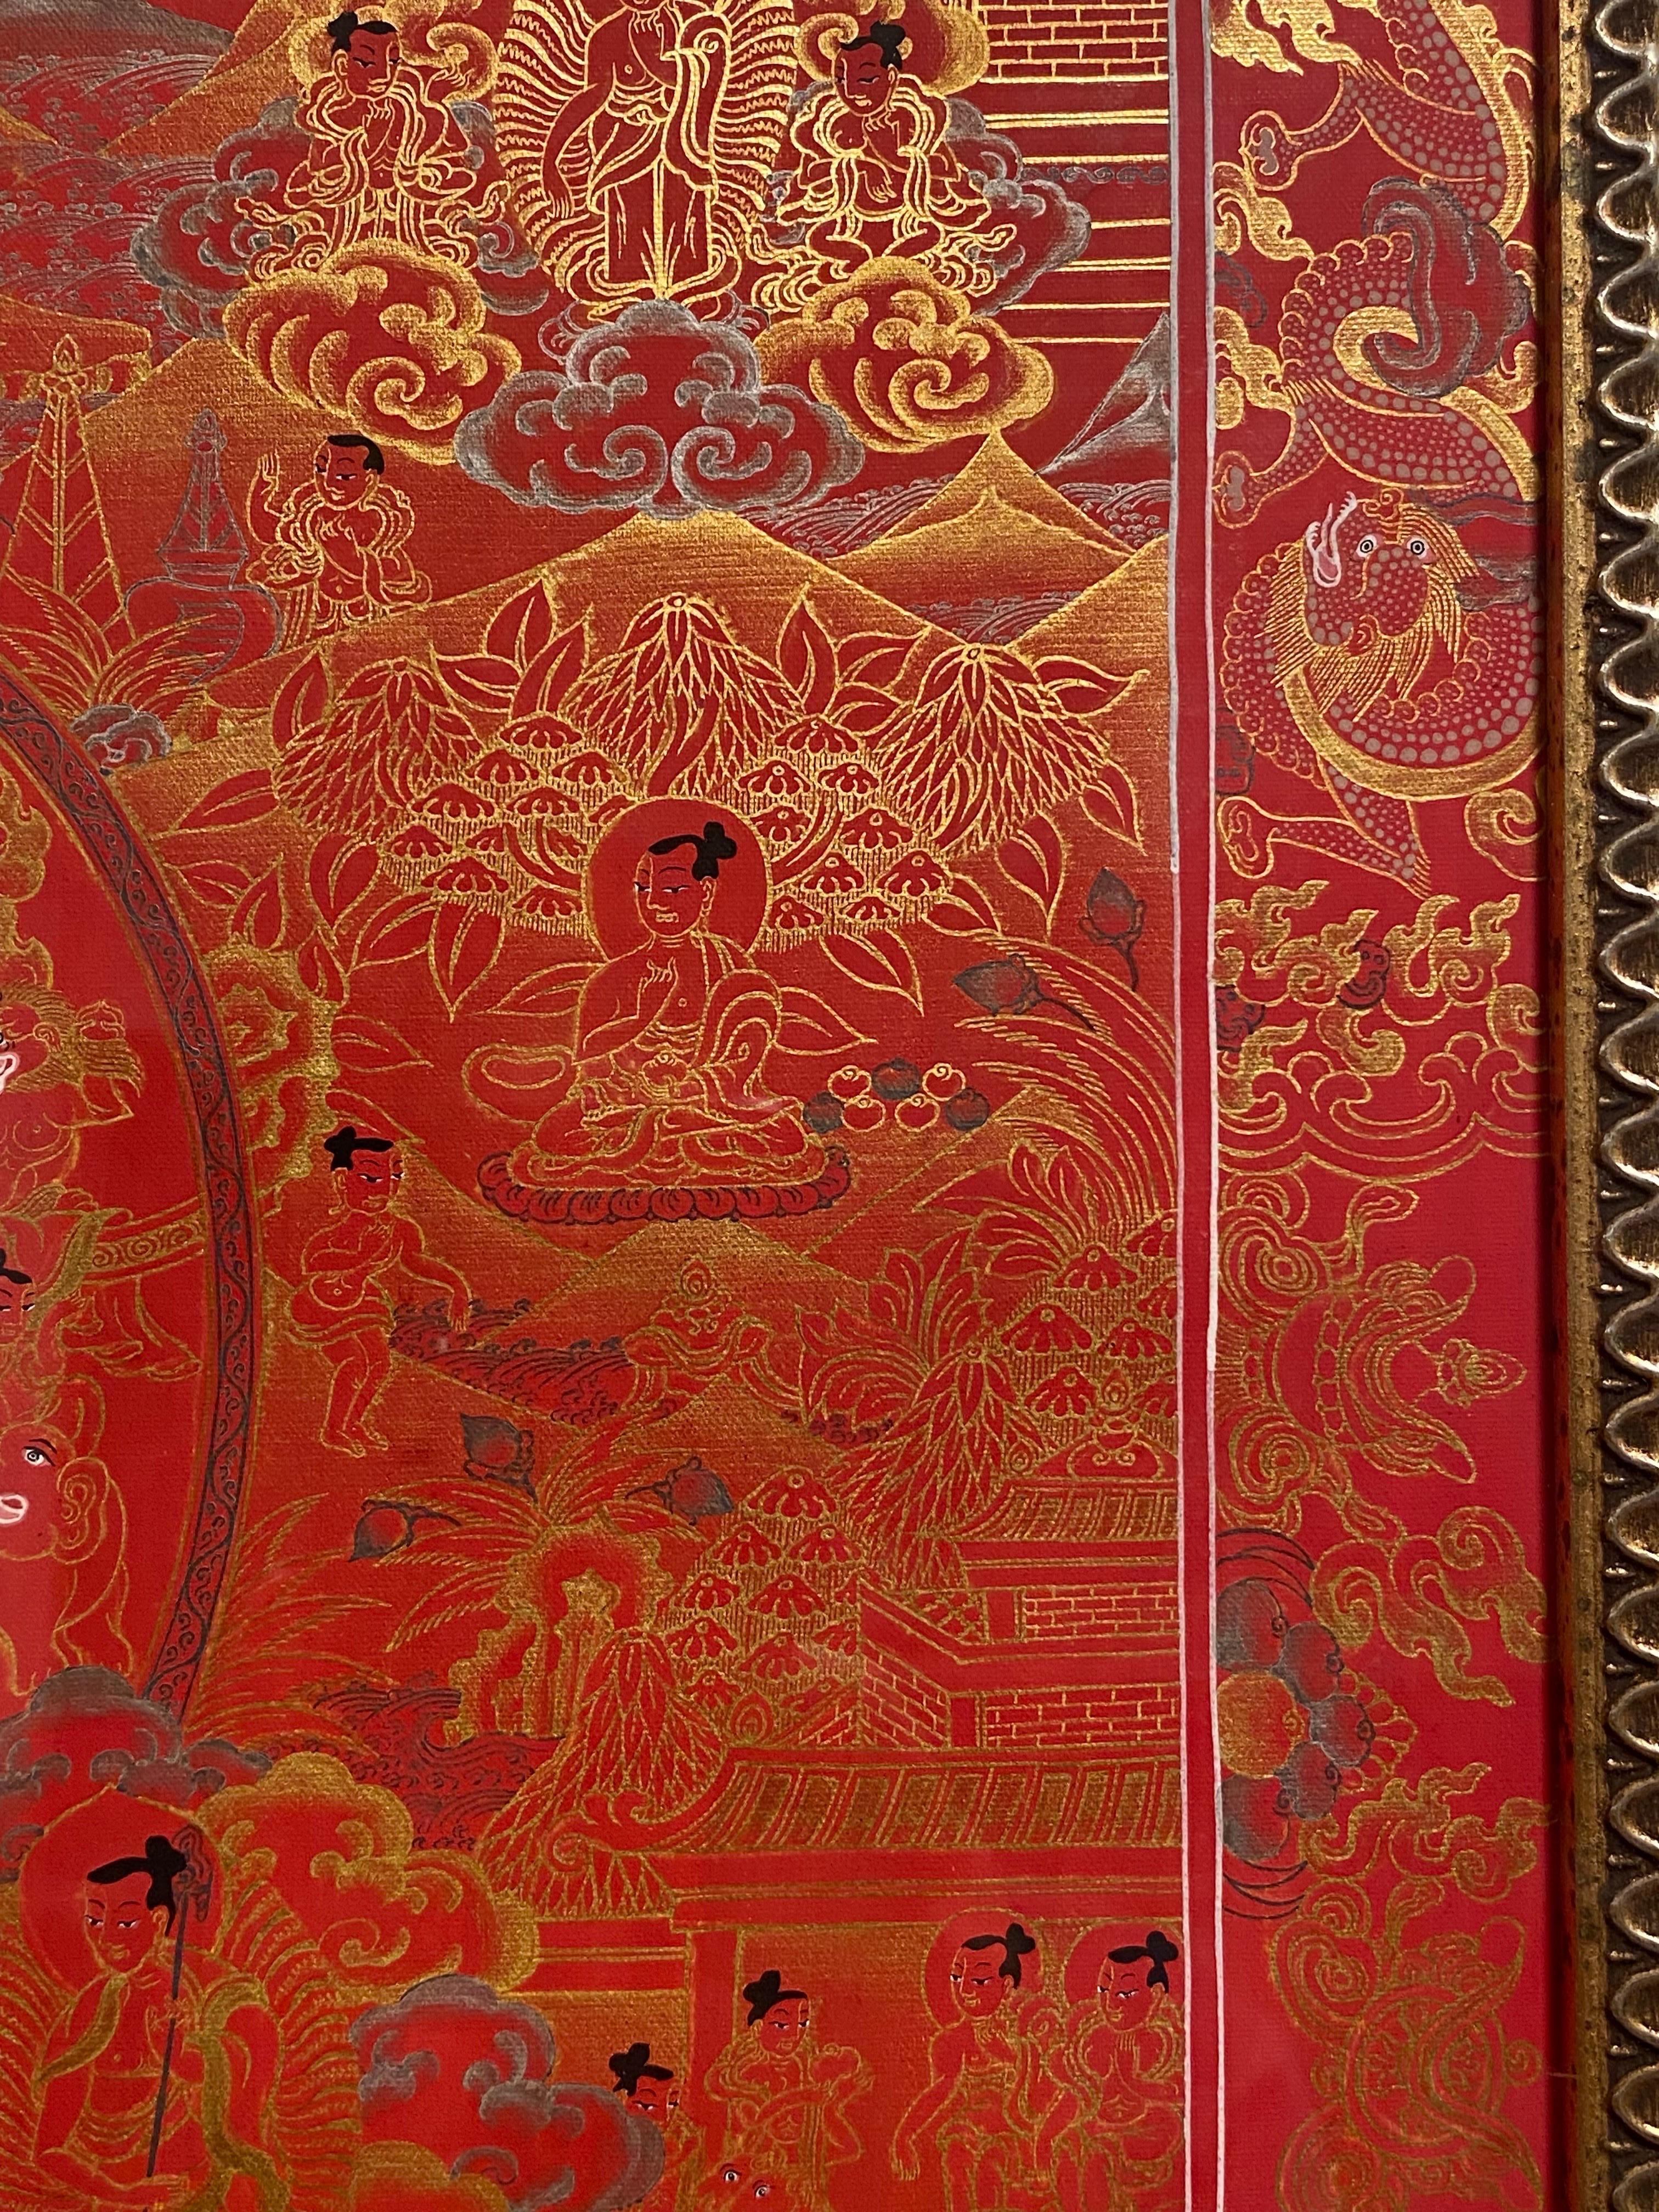 Framed Hand Painted on Canvas Life History of Buddha Thangka 24K Gold For Sale 3